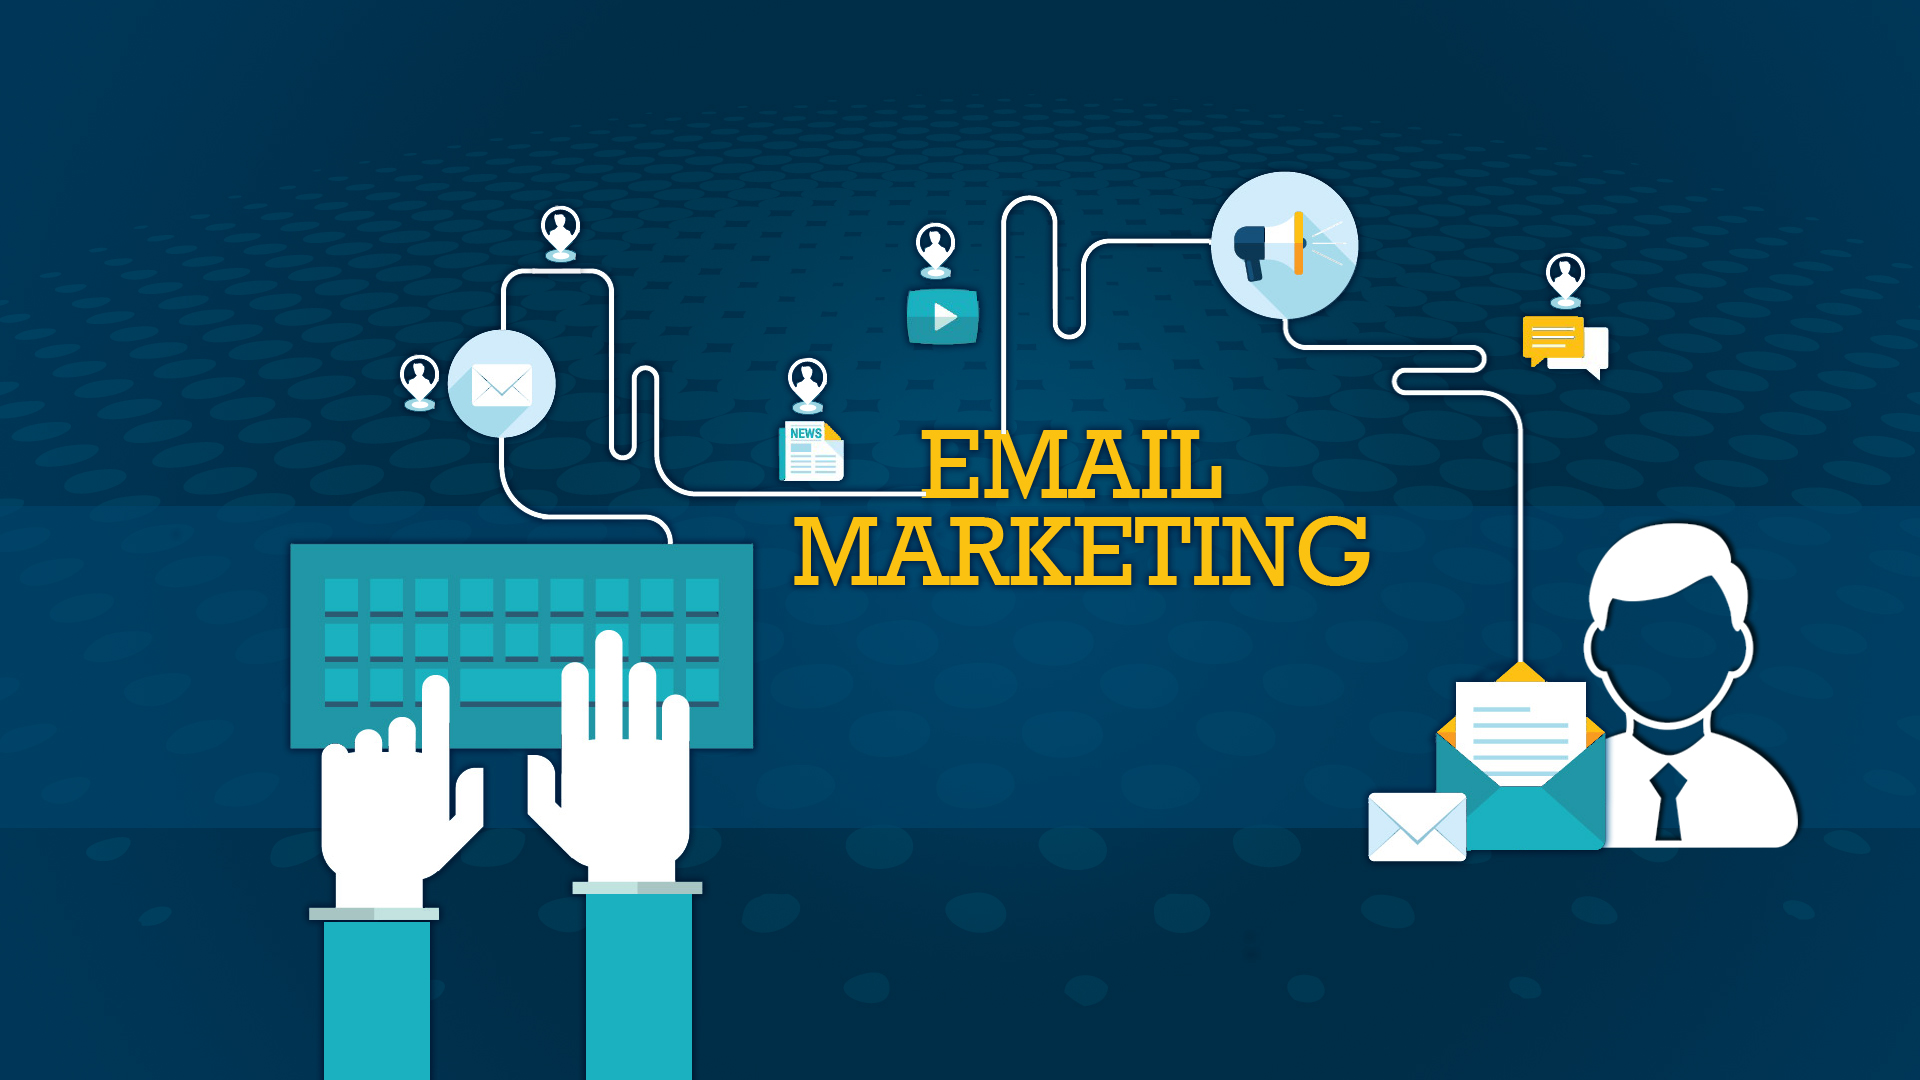 email marketing tips to grow your business